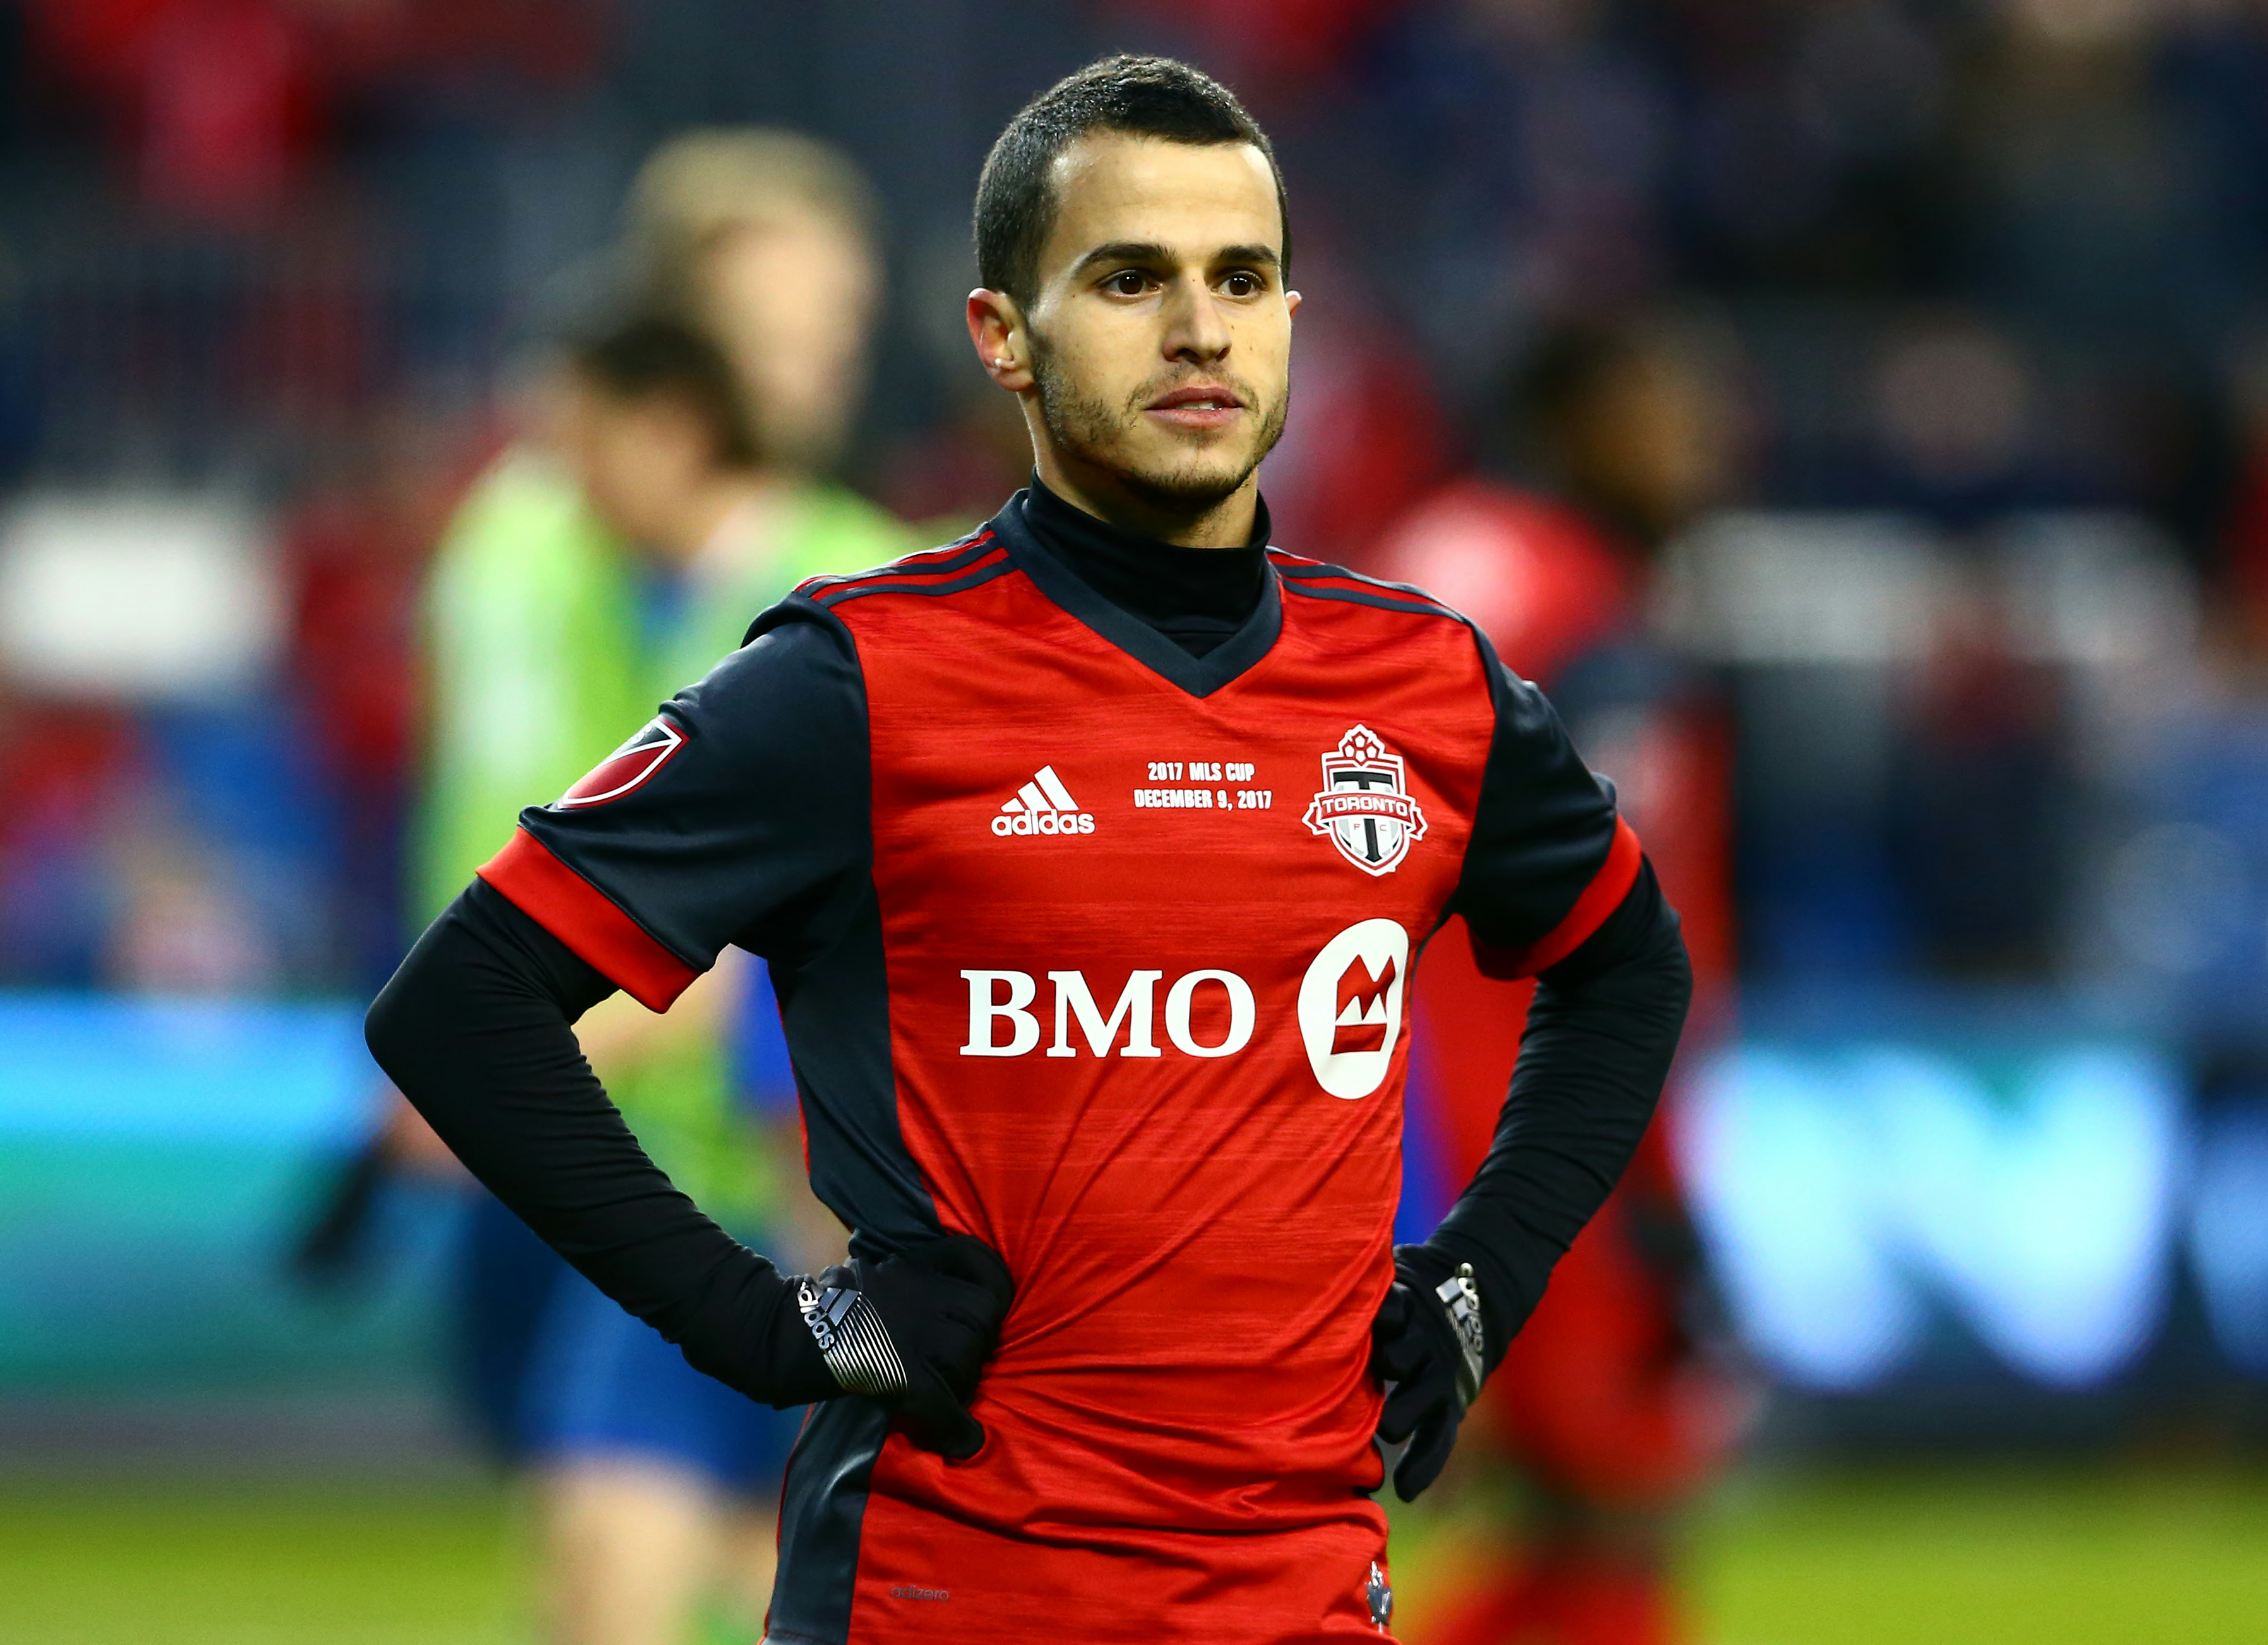 Toronto FC: The Good, the Bad and the Ugly of TFC's kits